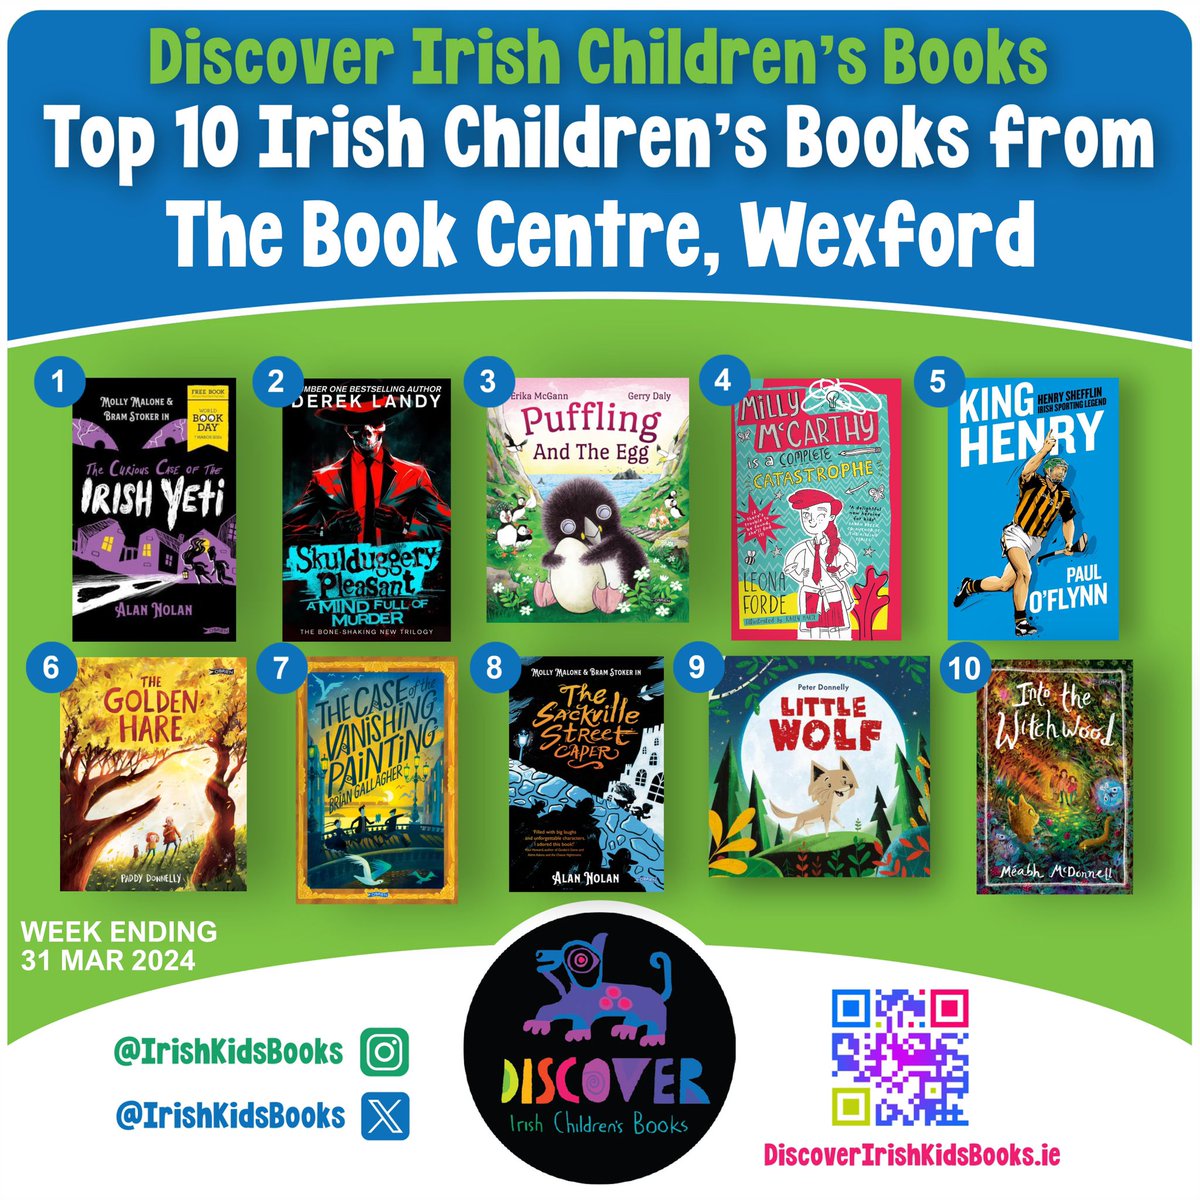 Delighted that Milly McCarthy is a Complete Catastrophe is part of this weeks @IrishKidsBooks Top 10 Children's Books from @TheBookCentres Wexford. What a fab list. 📚💚📚 Download the poster here: discoveririshkidsbooks.ie/blog/